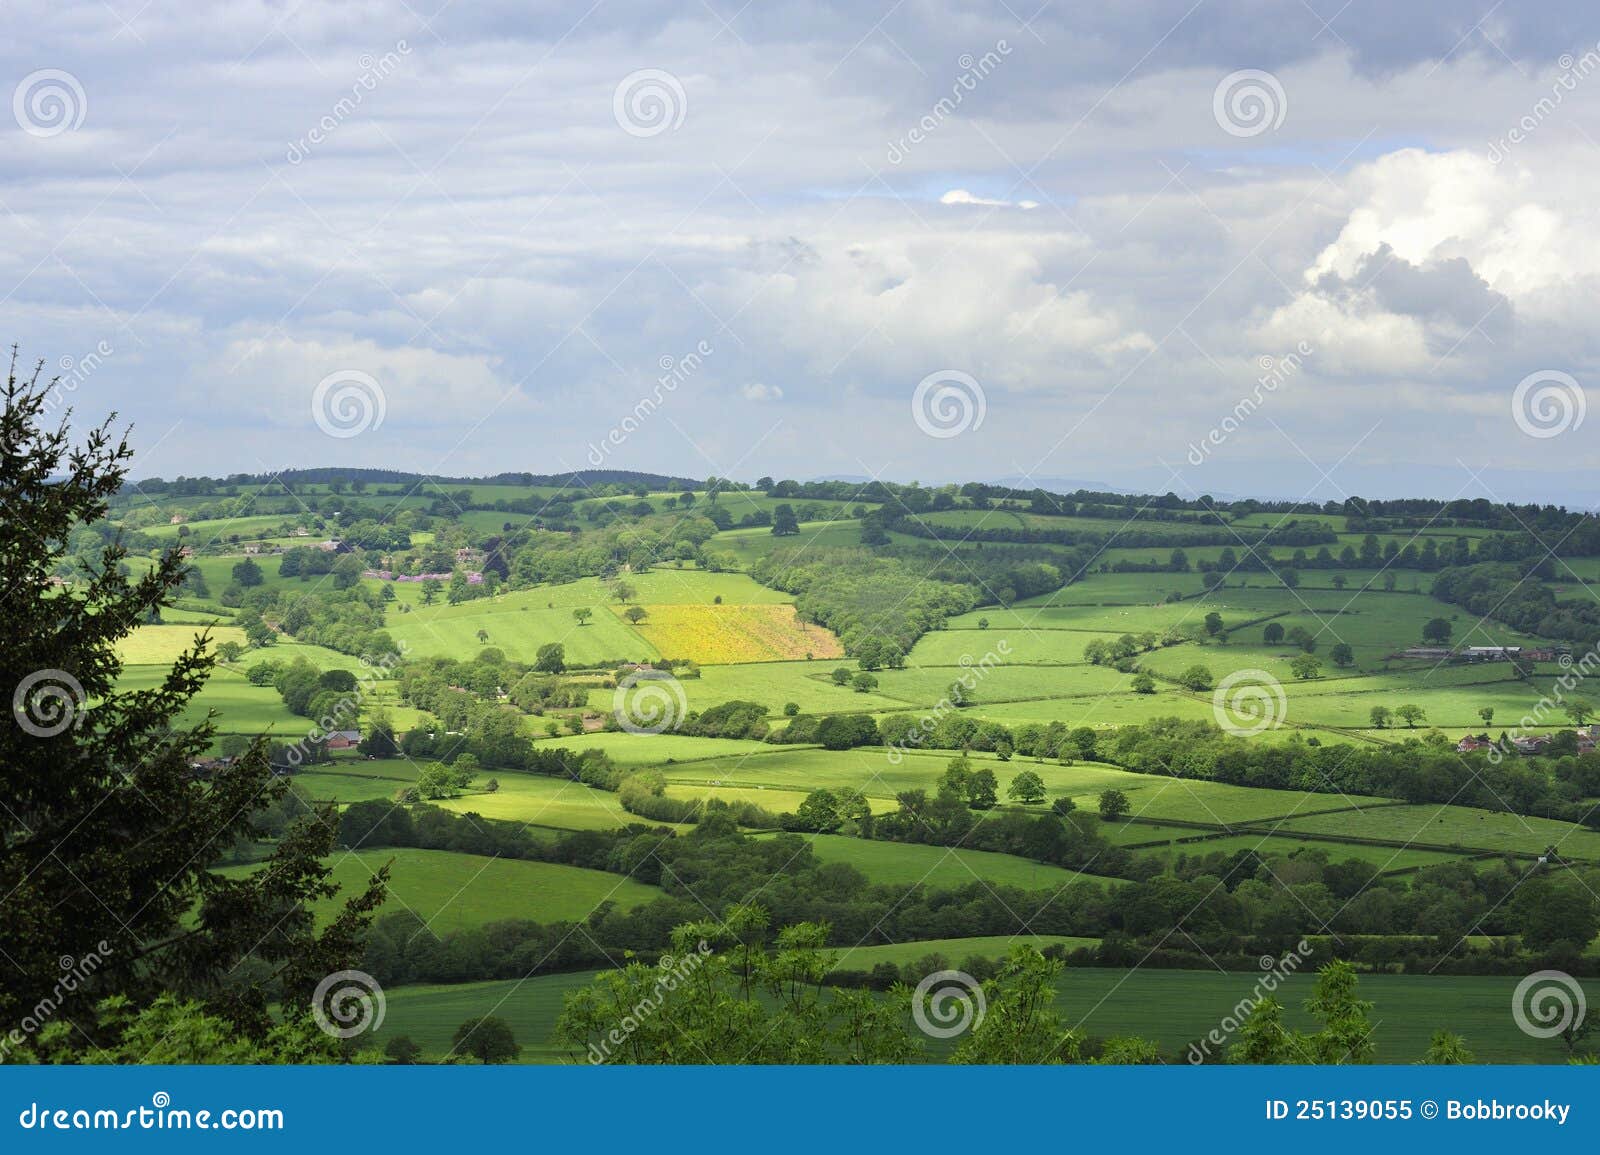 the shropshire countryside